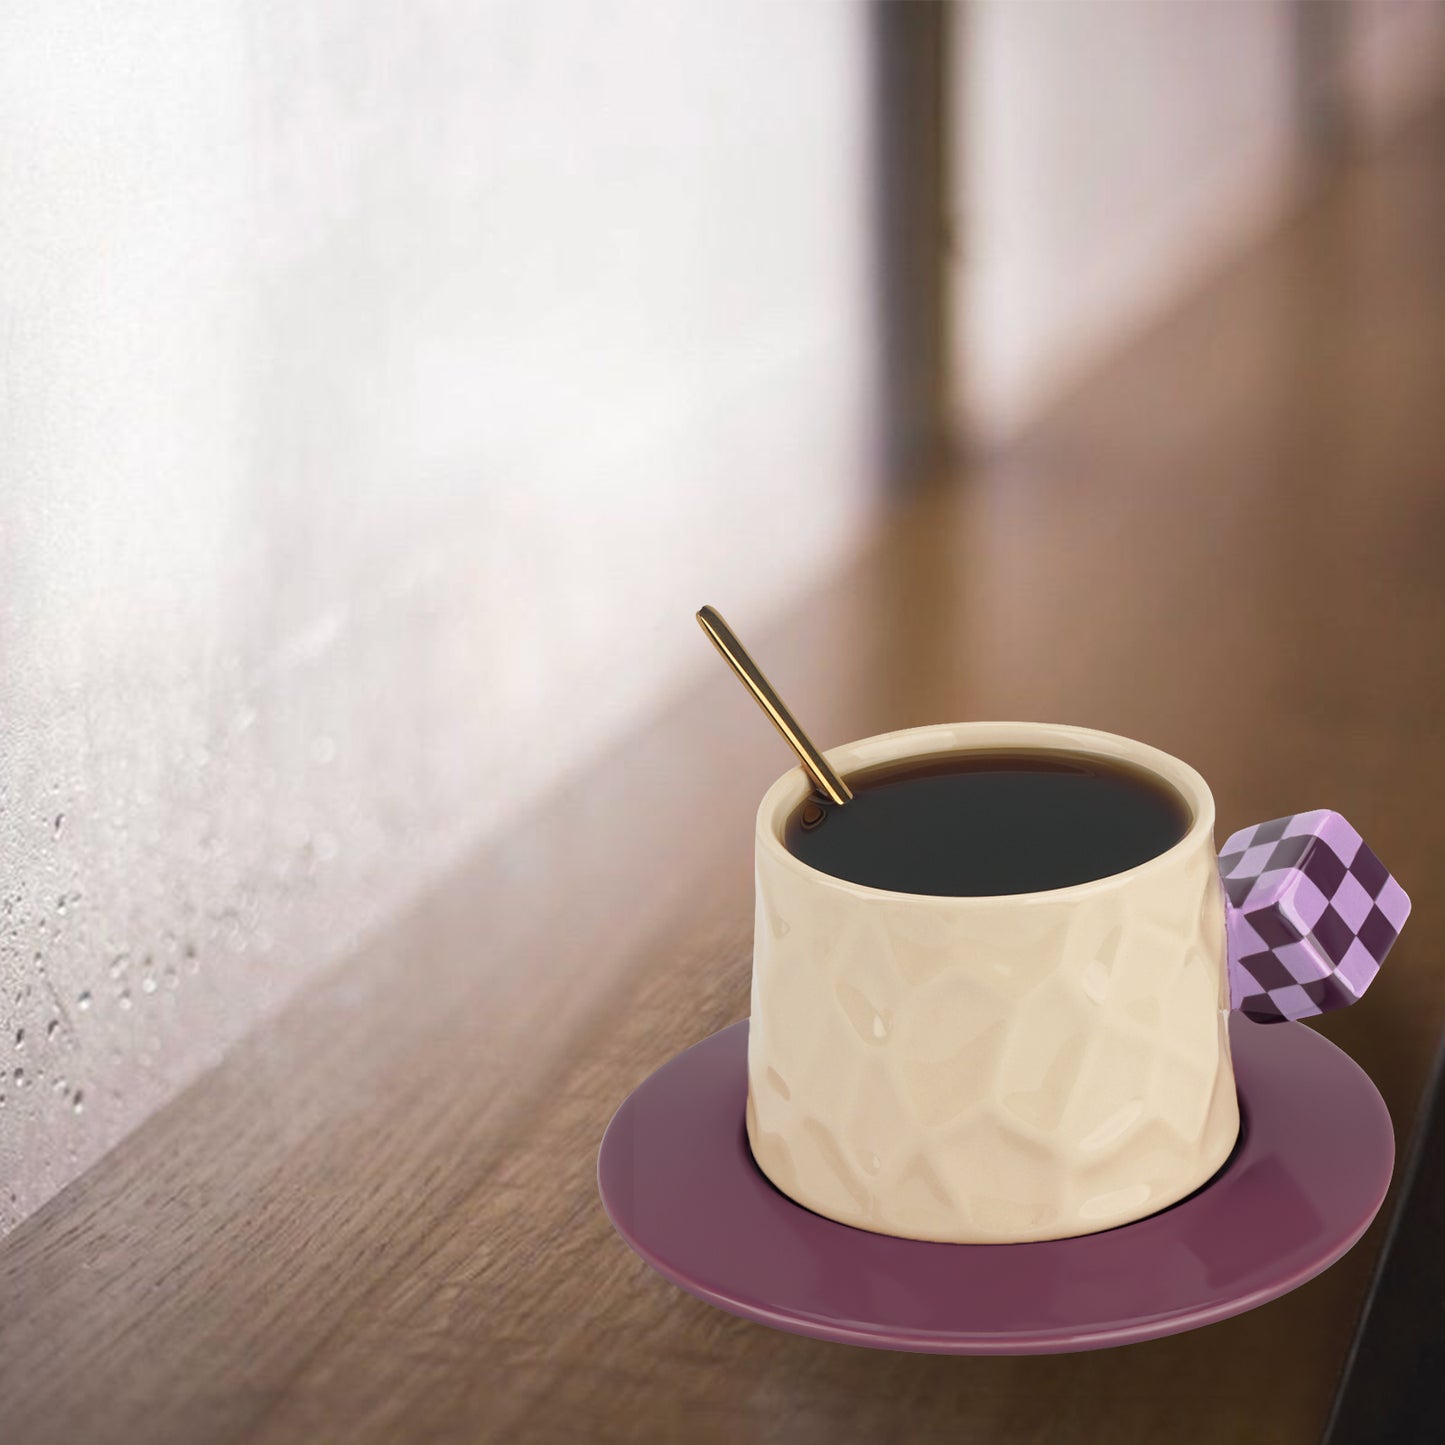 Novelty Tea Cup and Saucer Set with Cubic Handle, Ceramic Coffee Cups Mug for Home Office Party